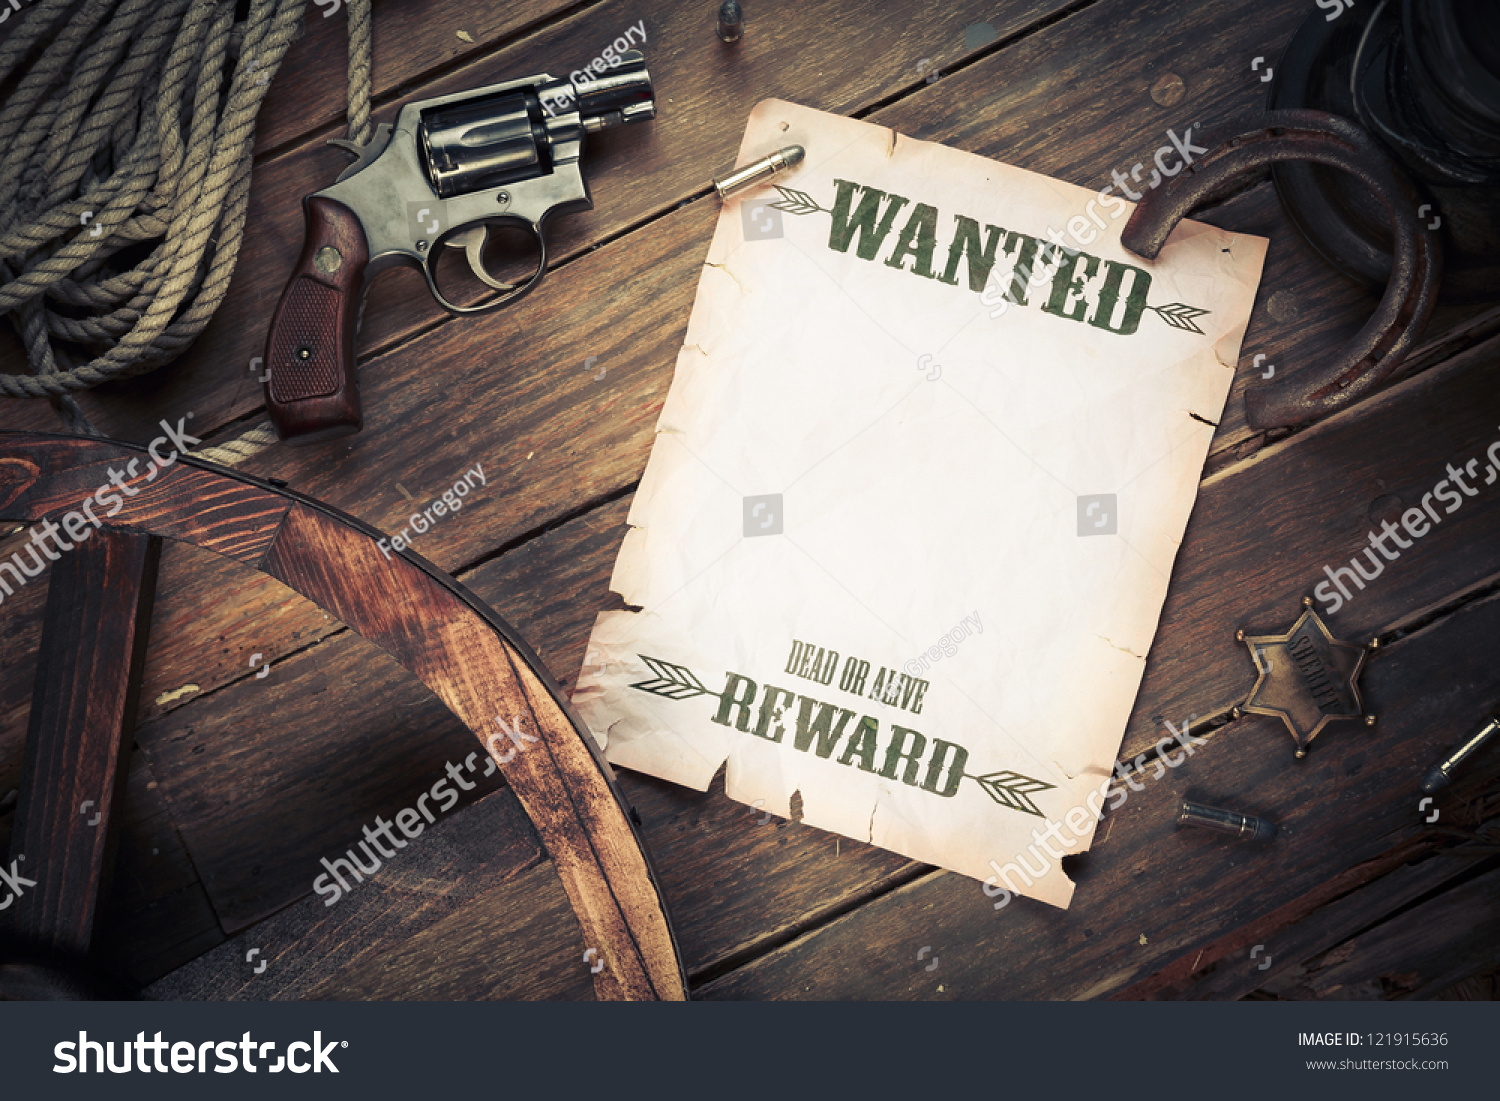 Old Western Background Wanted Poster Stock Photo 121915636 - Shutterstock